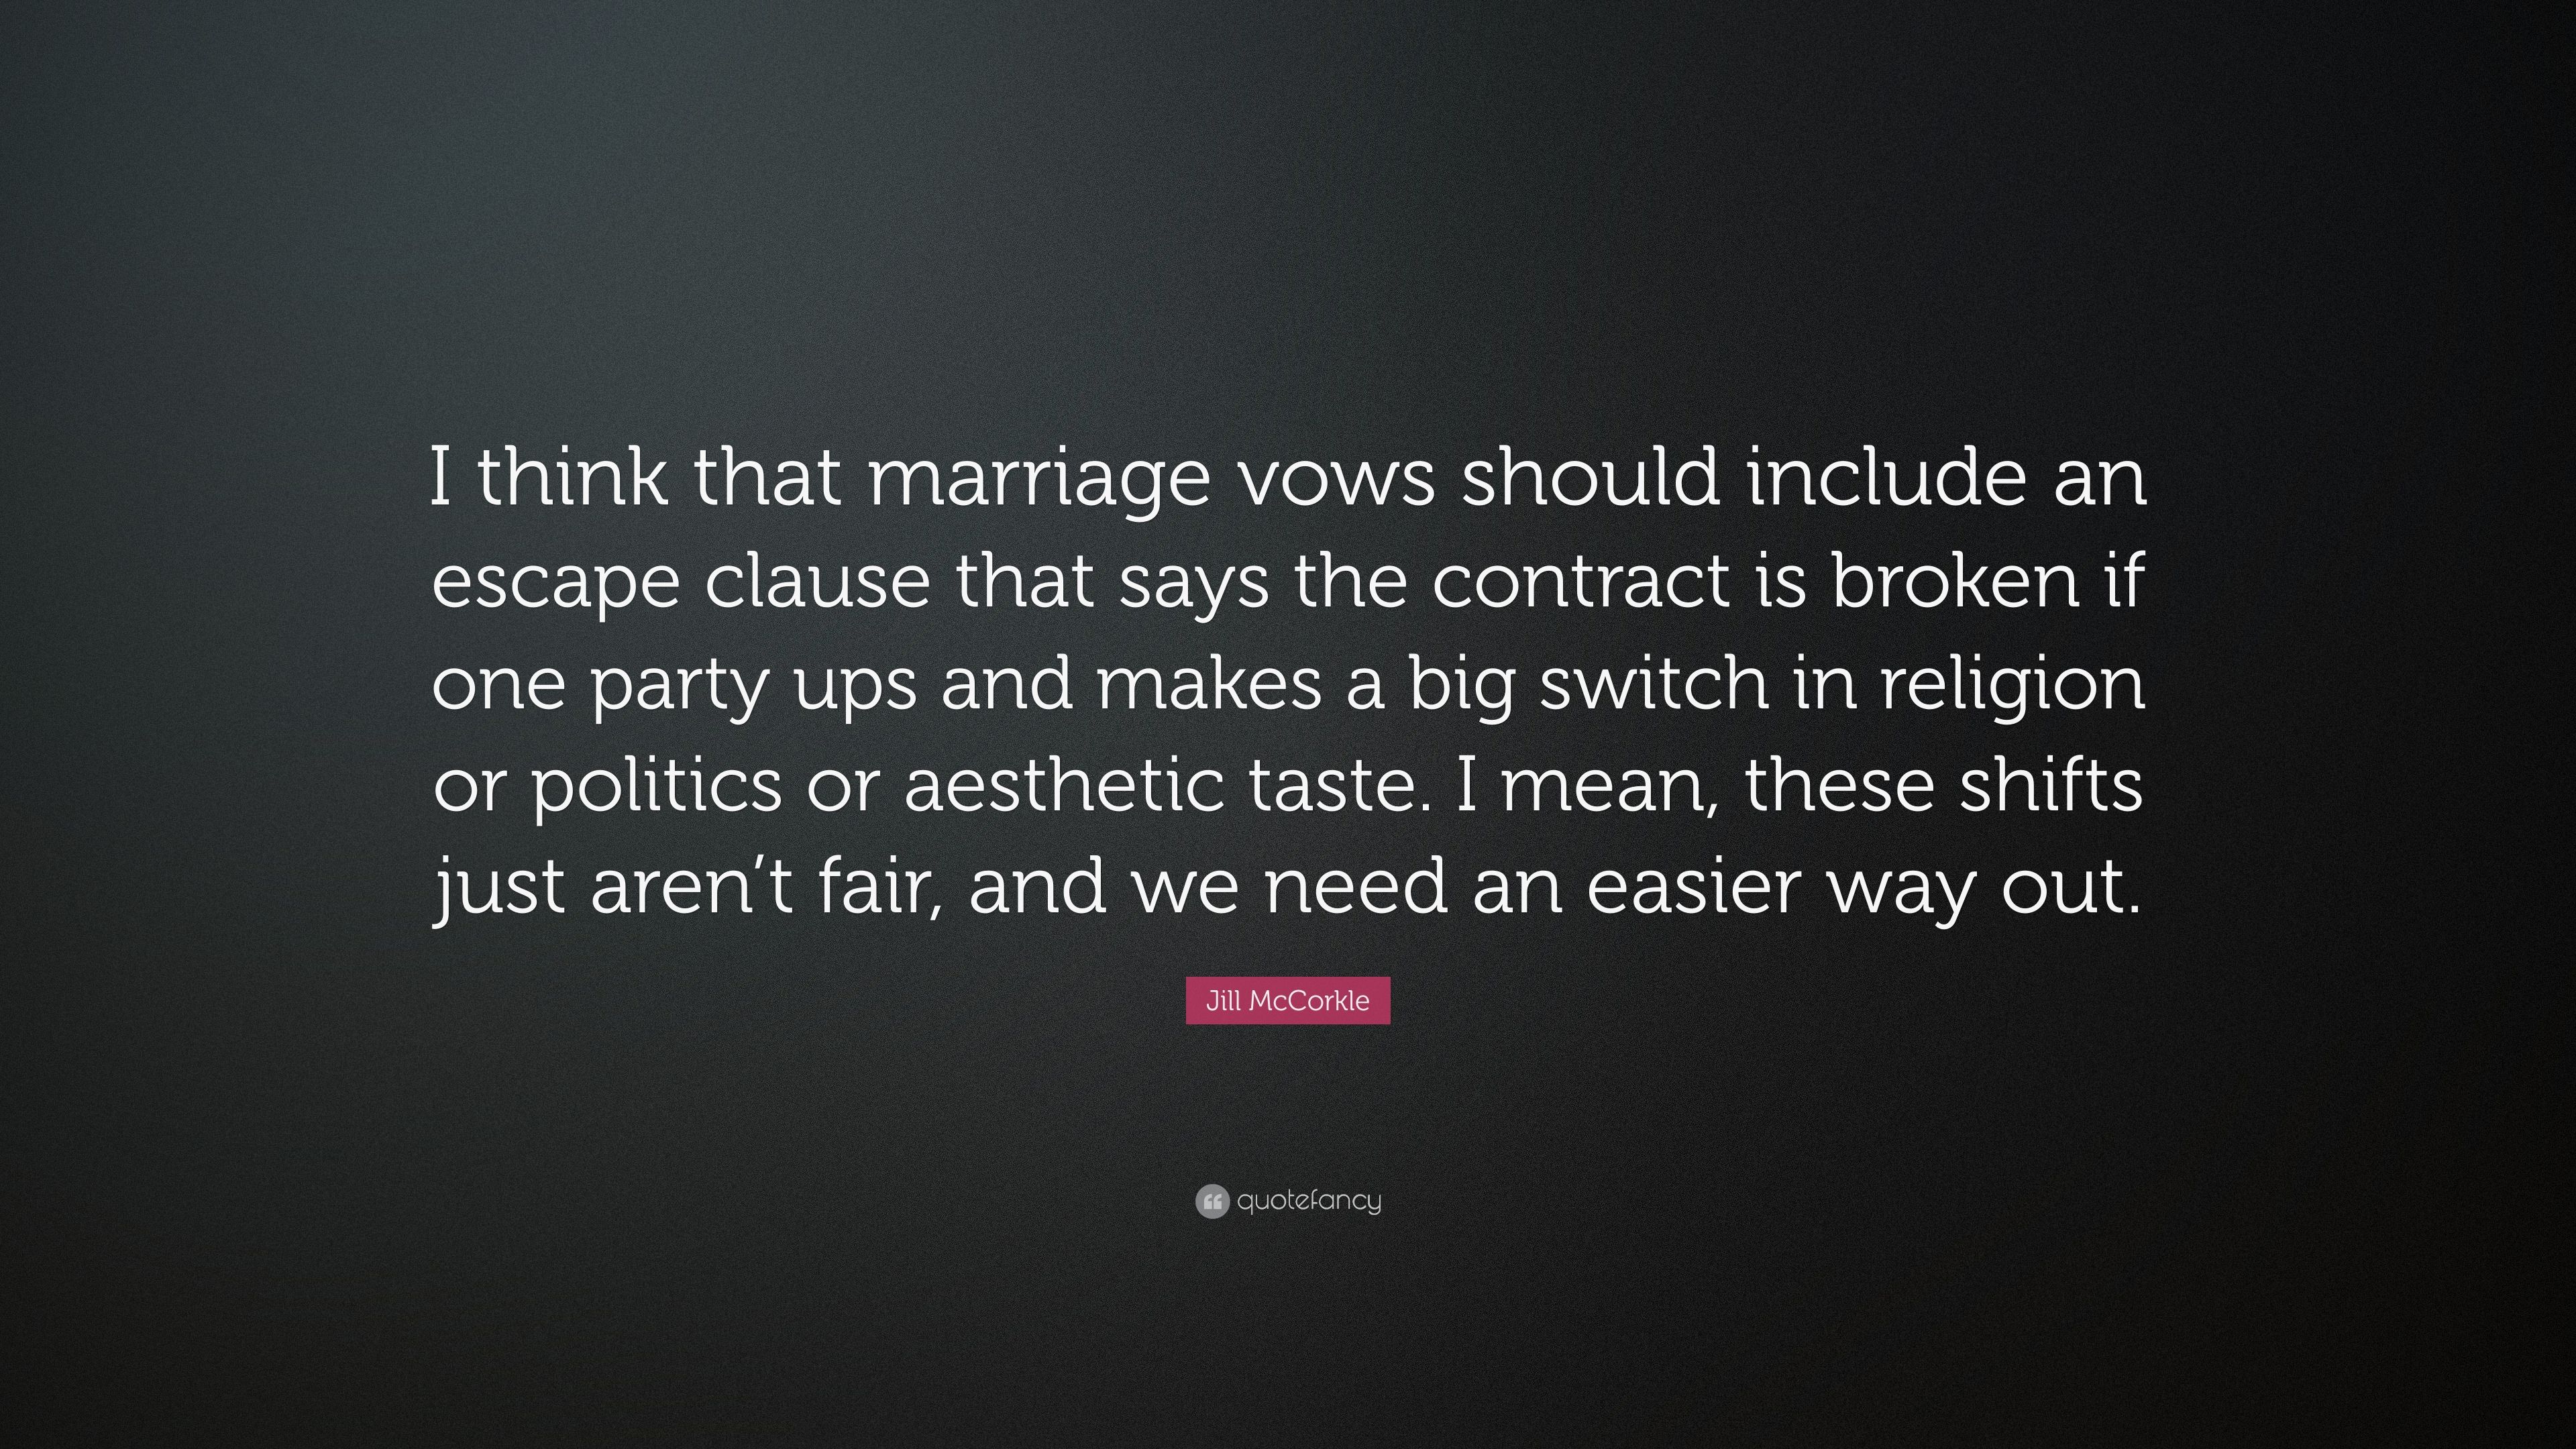 Jill McCorkle Quote: “I think that marriage vows should